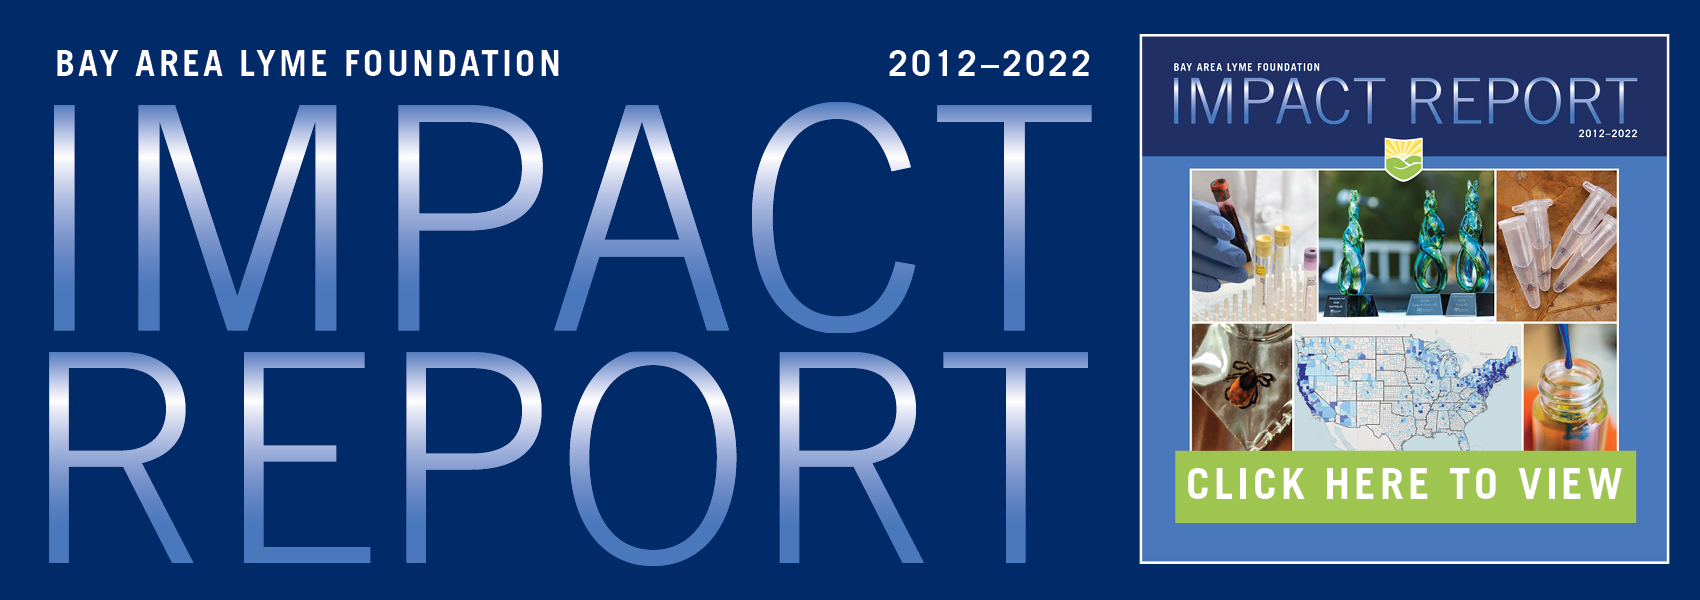 Bay Area Lyme Impact Report 2012-2022